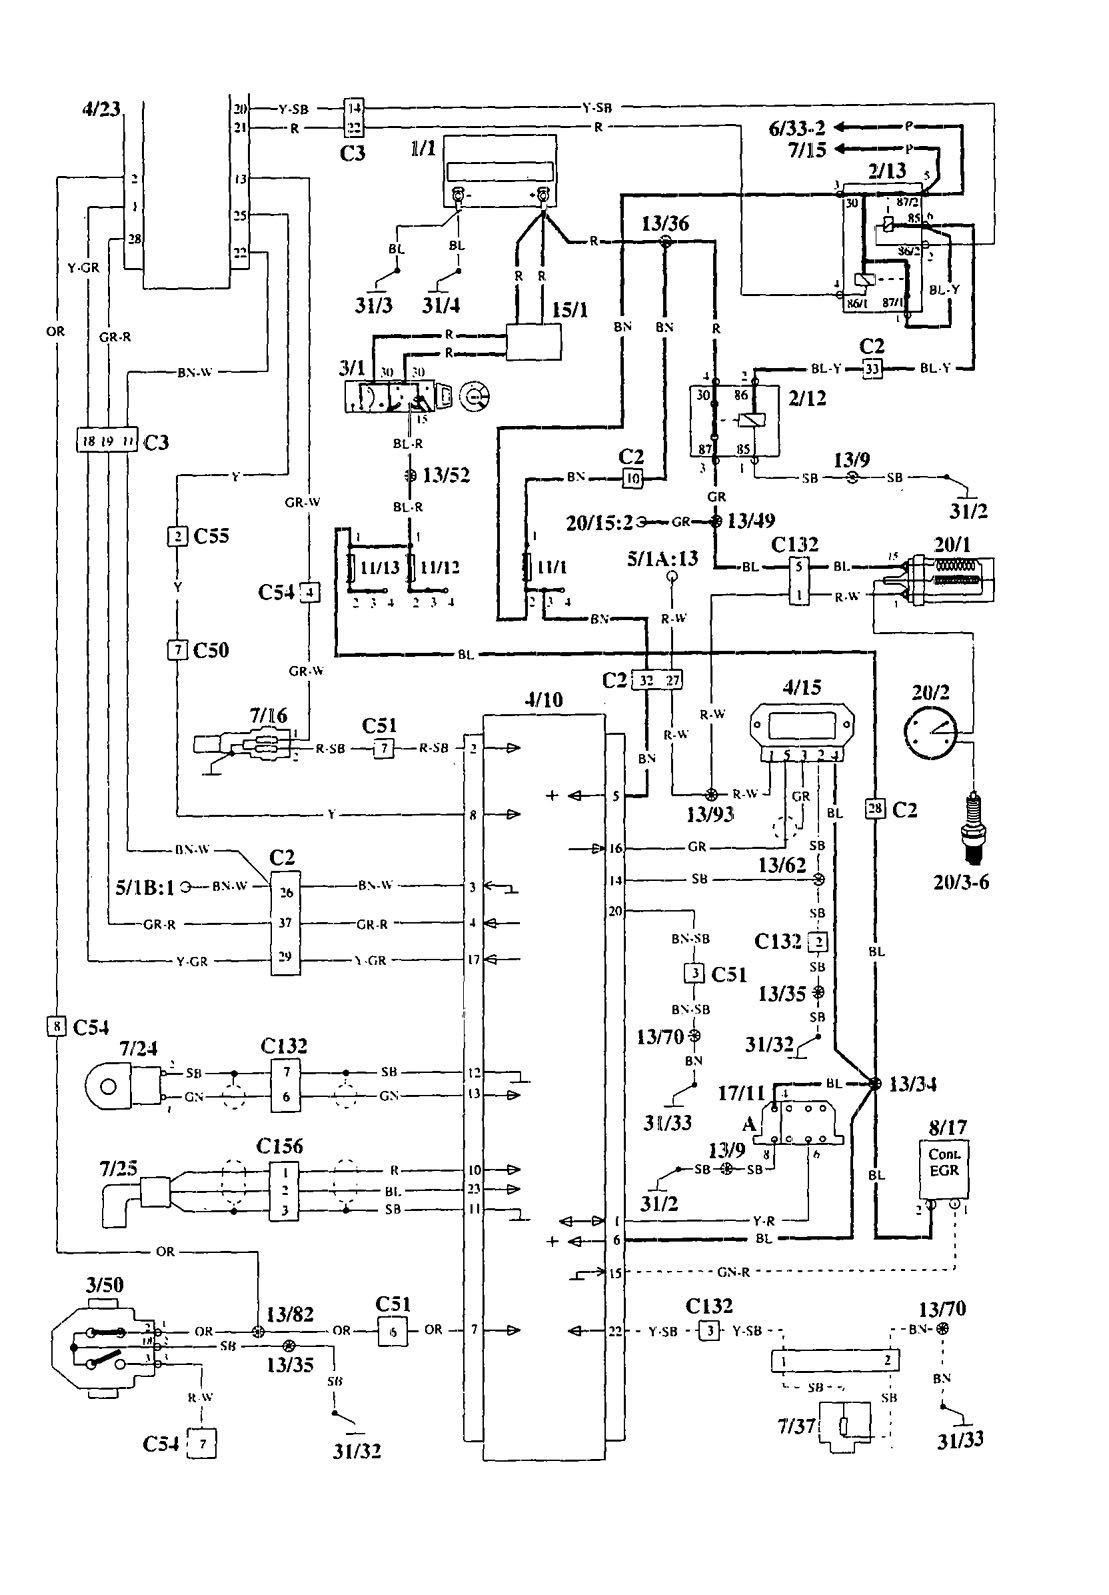 1995 Cadillac Deville Wiring Dlc Schematic from www.carknowledge.info